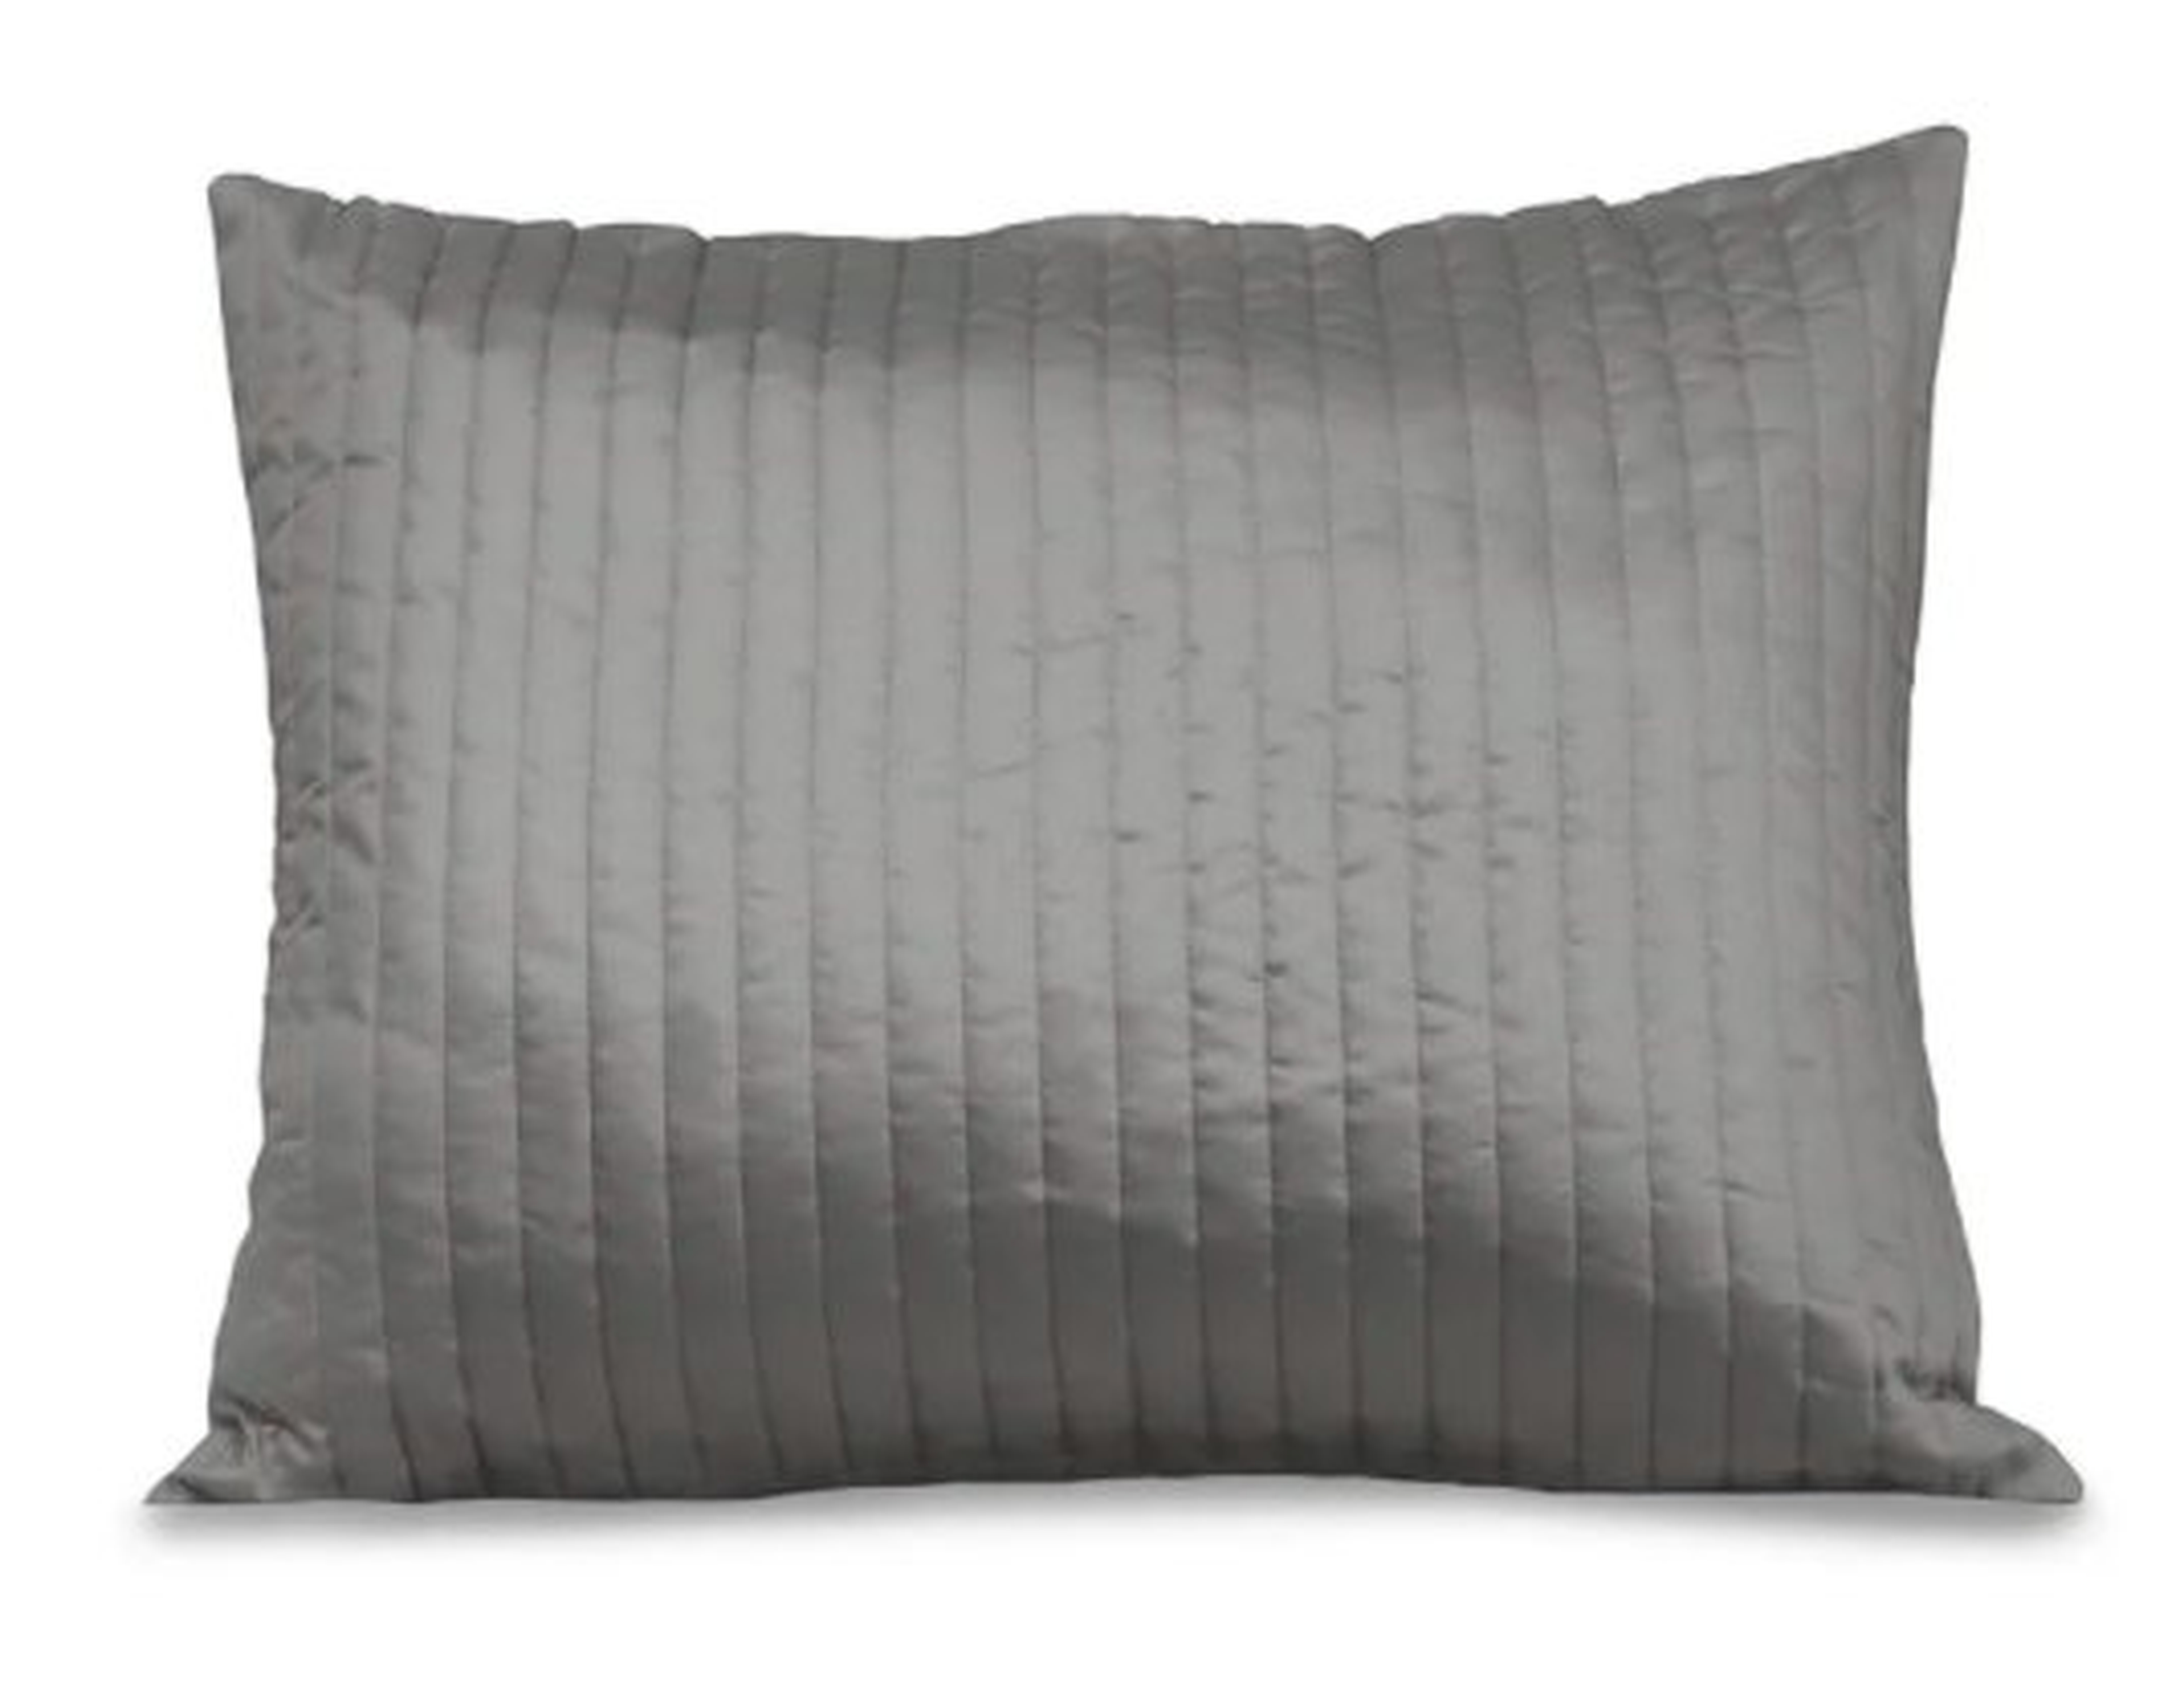 Signoria Firenze Siena Channel Quilted Sham Size: Queen, Color: Silver Moon - Perigold